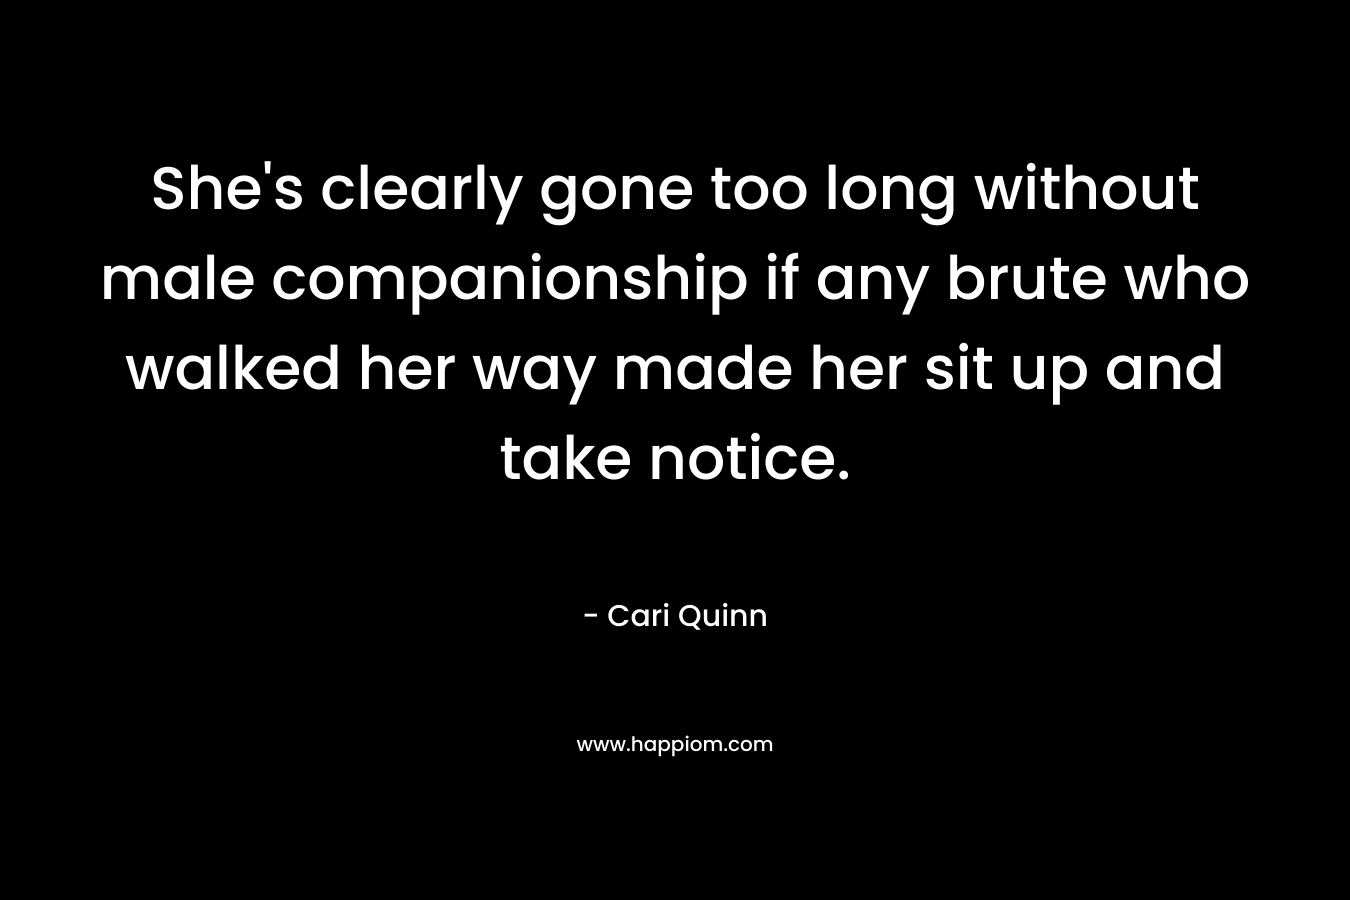 She's clearly gone too long without male companionship if any brute who walked her way made her sit up and take notice.